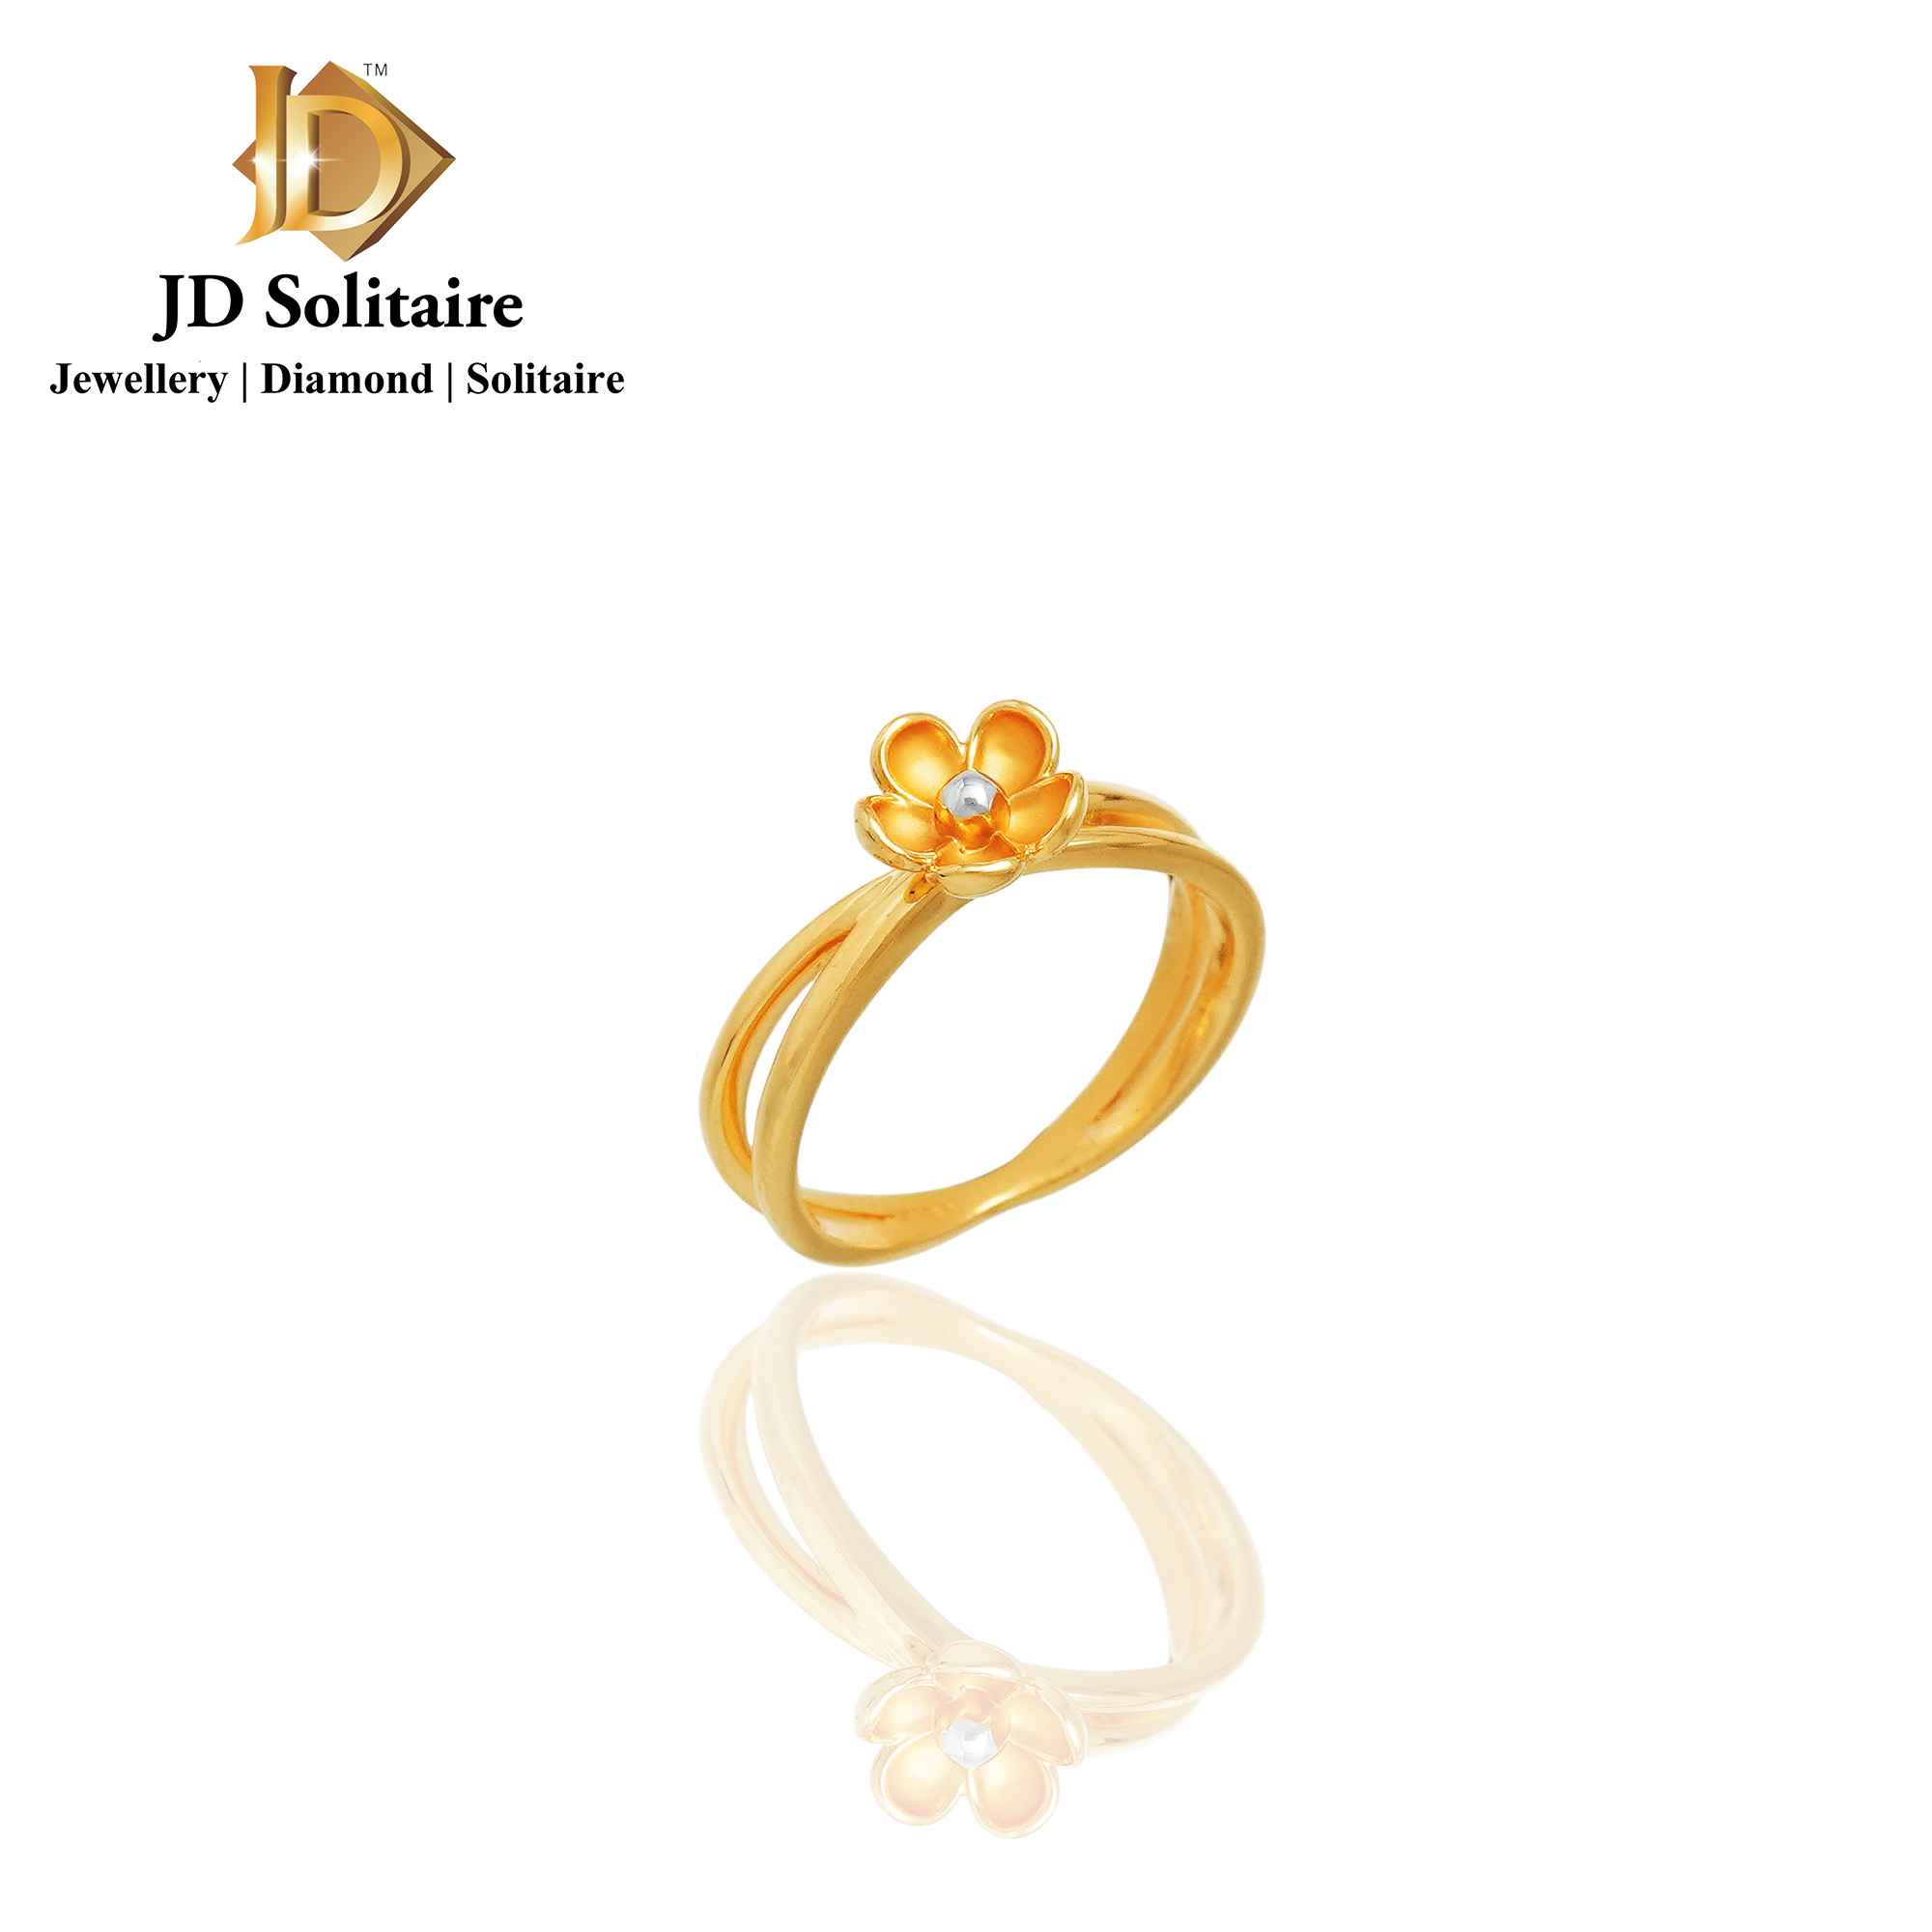 Beautiful gold ring designs for women - YouTube